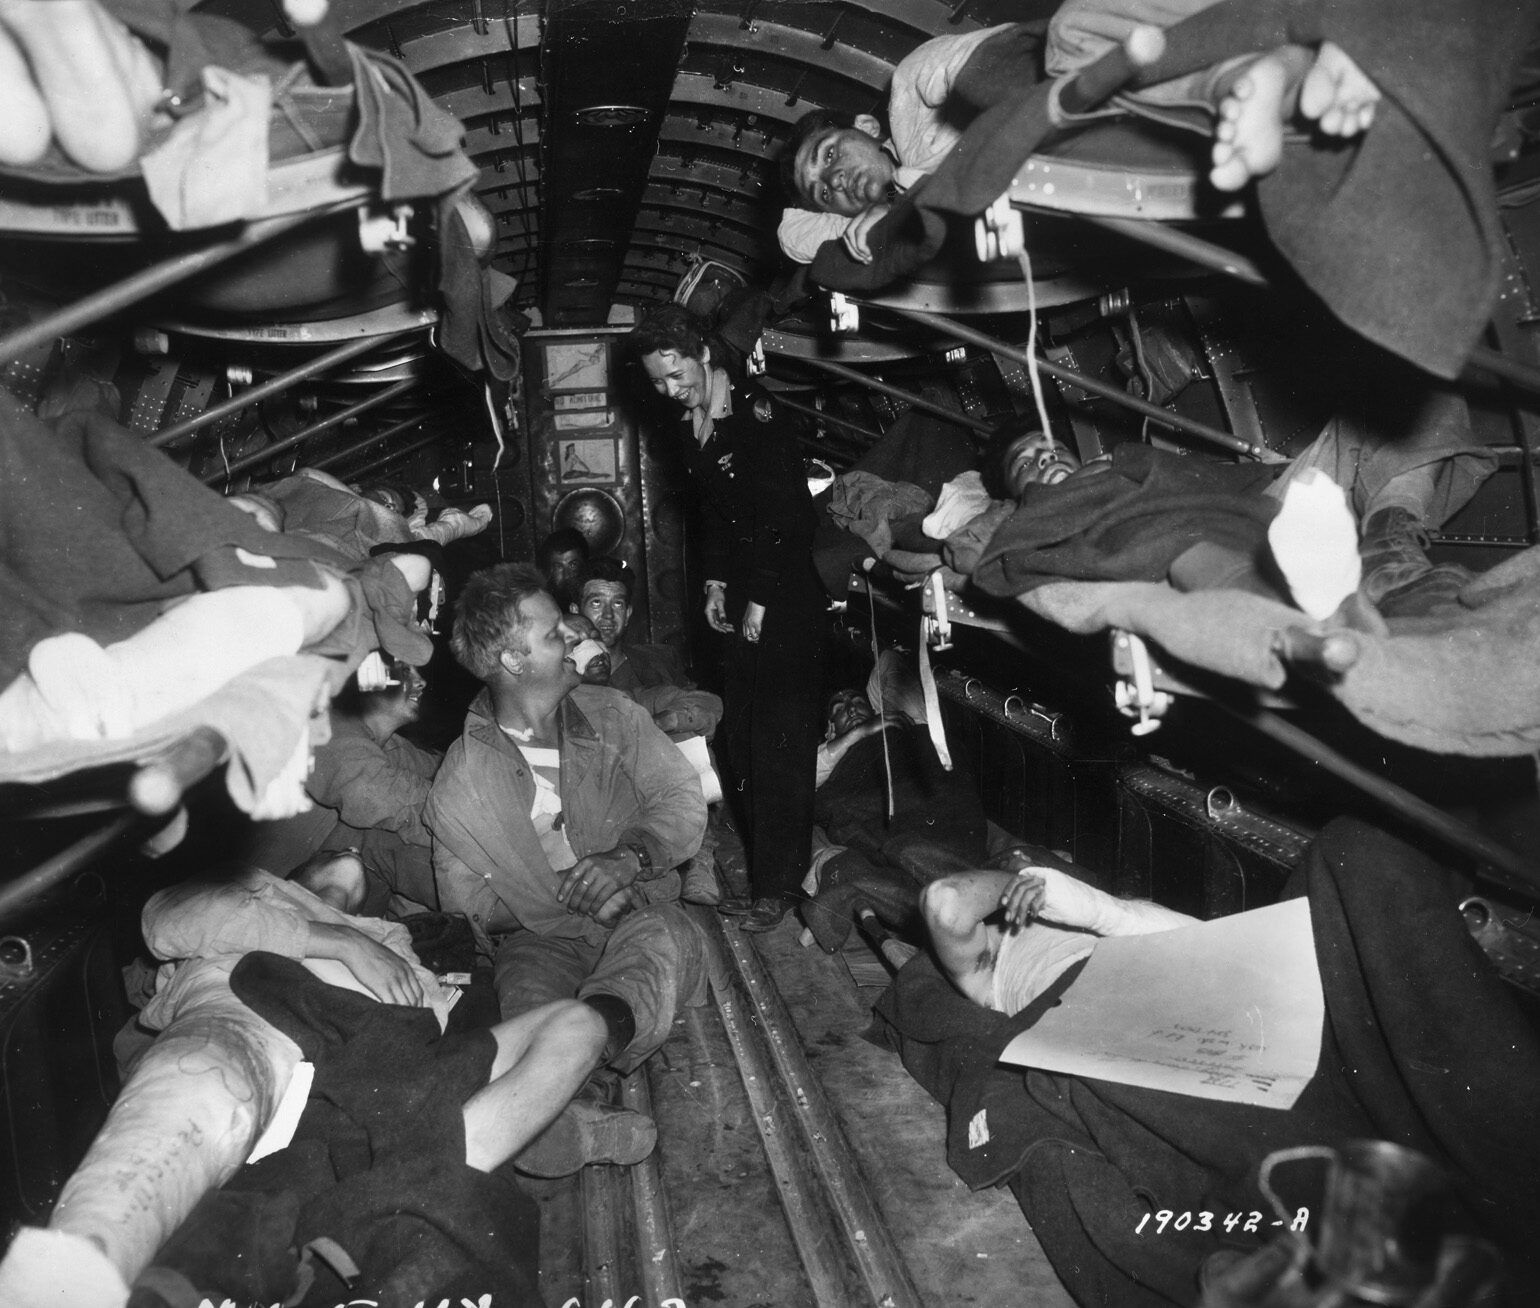 A flight nurse cares for wounded soldiers aboard a C-47 Skytrain transport.